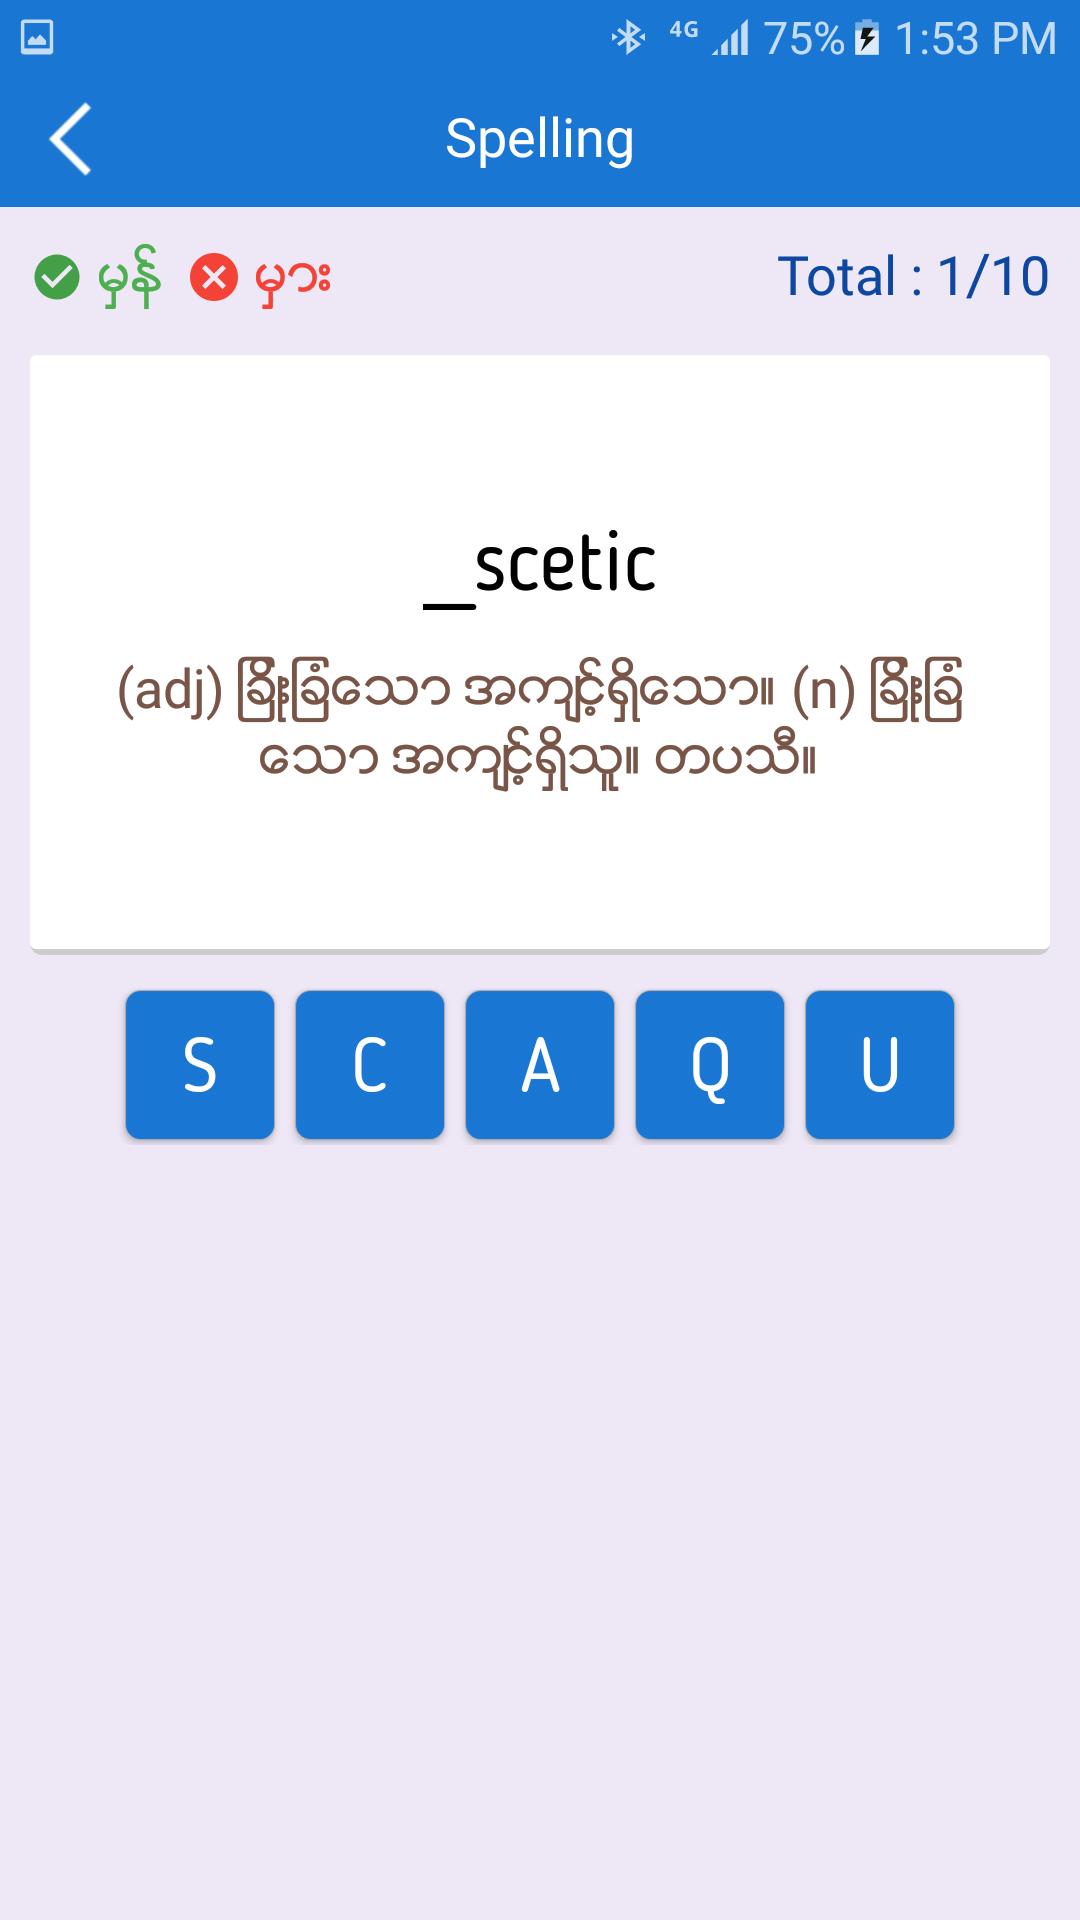 English-Myanmar Dictionary for Android - APK Download